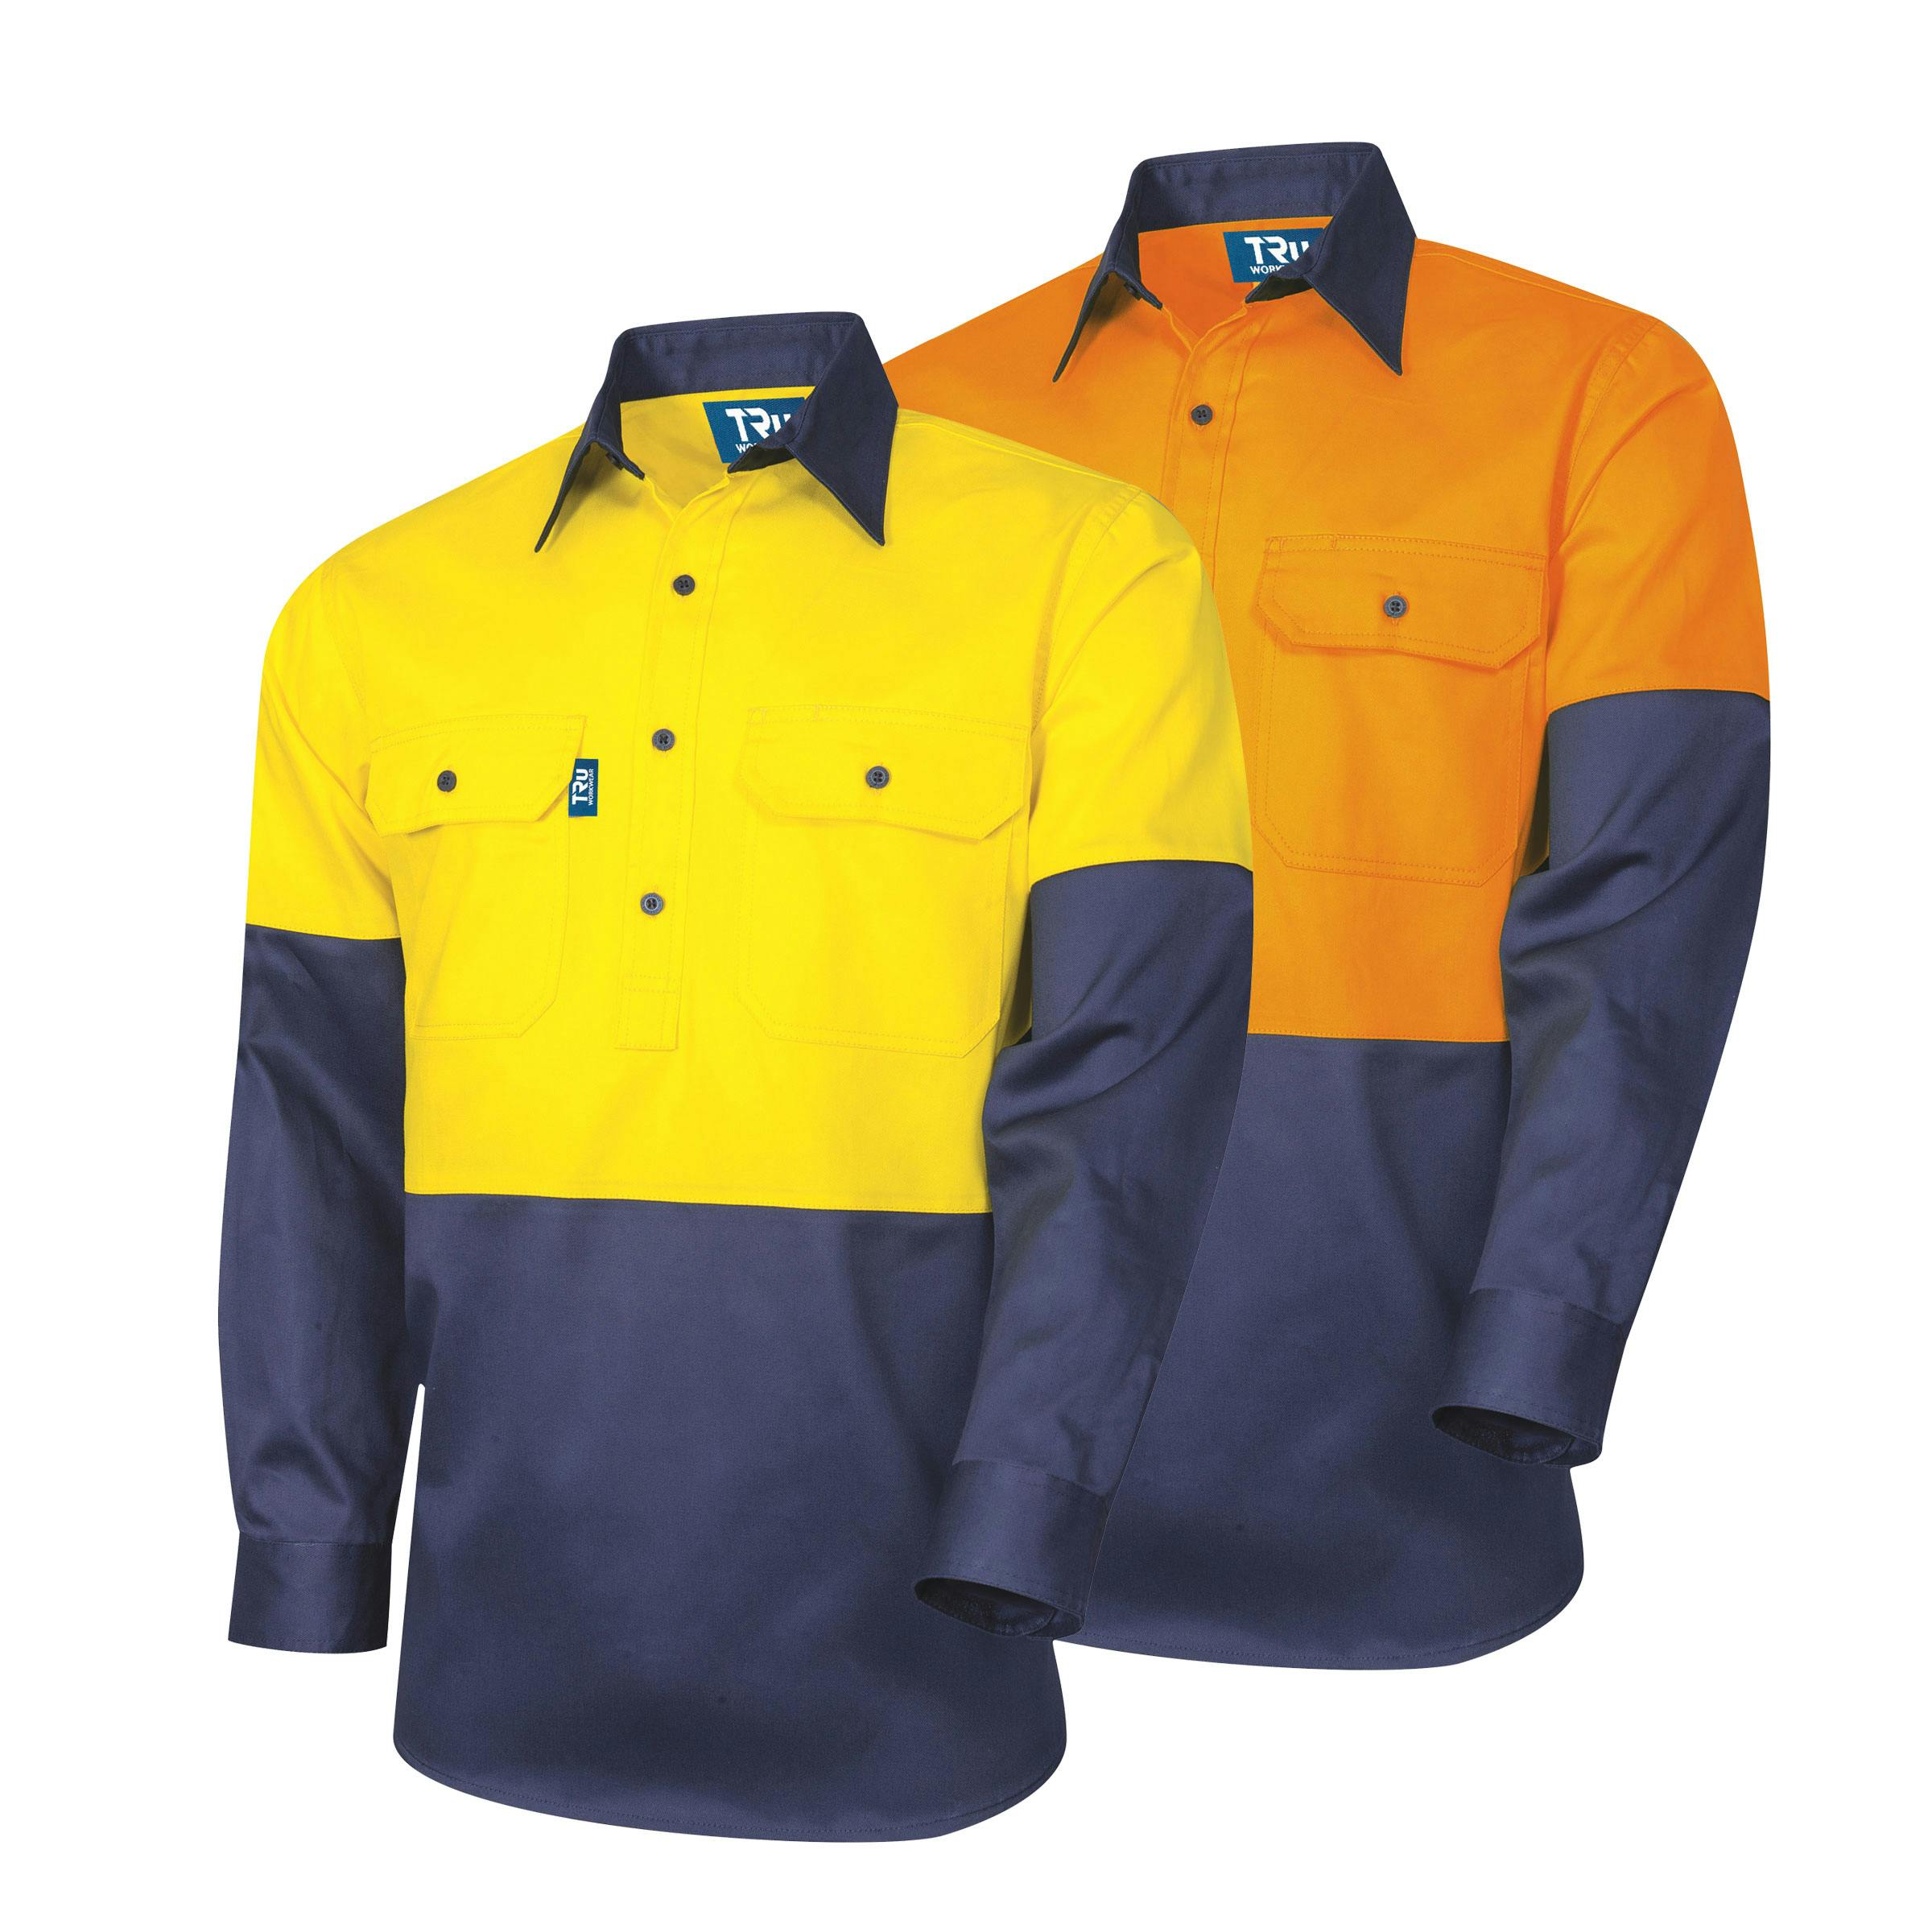 TRu Workwear Shirt 190gsm Closed Front L/S Two Tone Cotton Drill